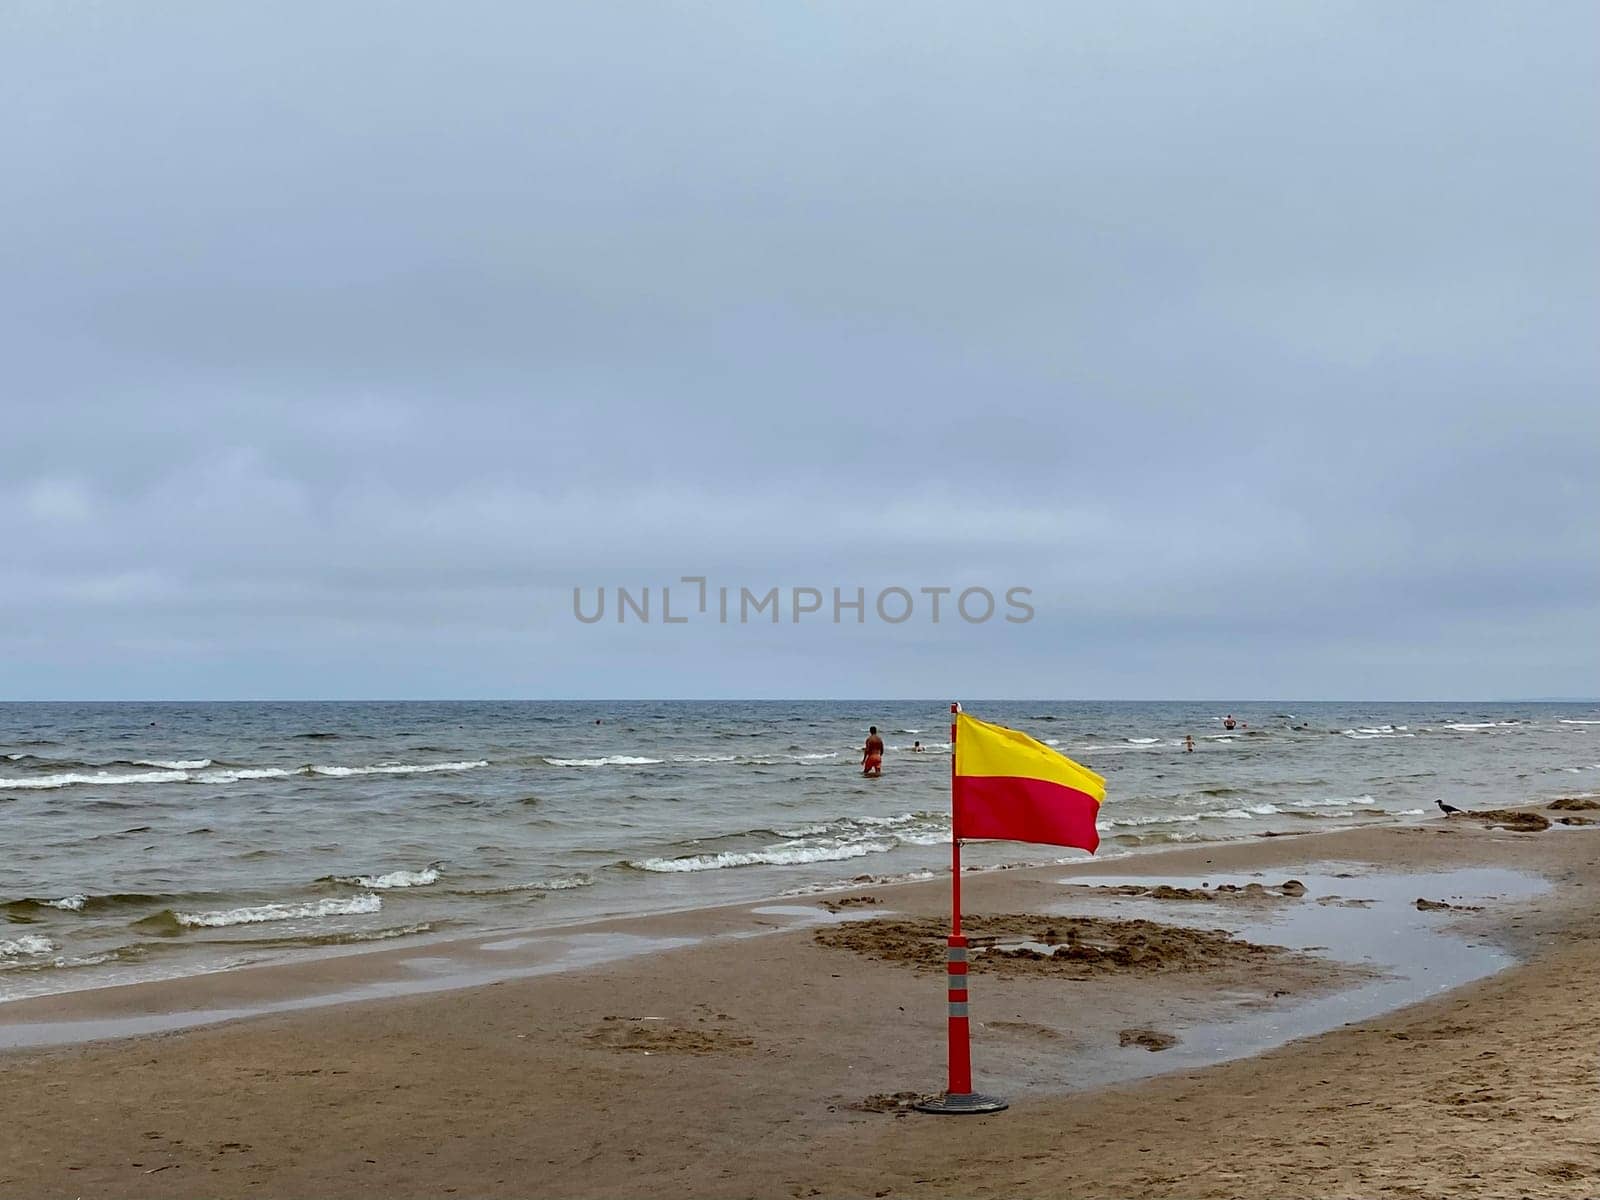 A Yellow and red beach flag, warning flag, lifesaving surf flag, rainy day in the beach, beach storm attention by DailySF